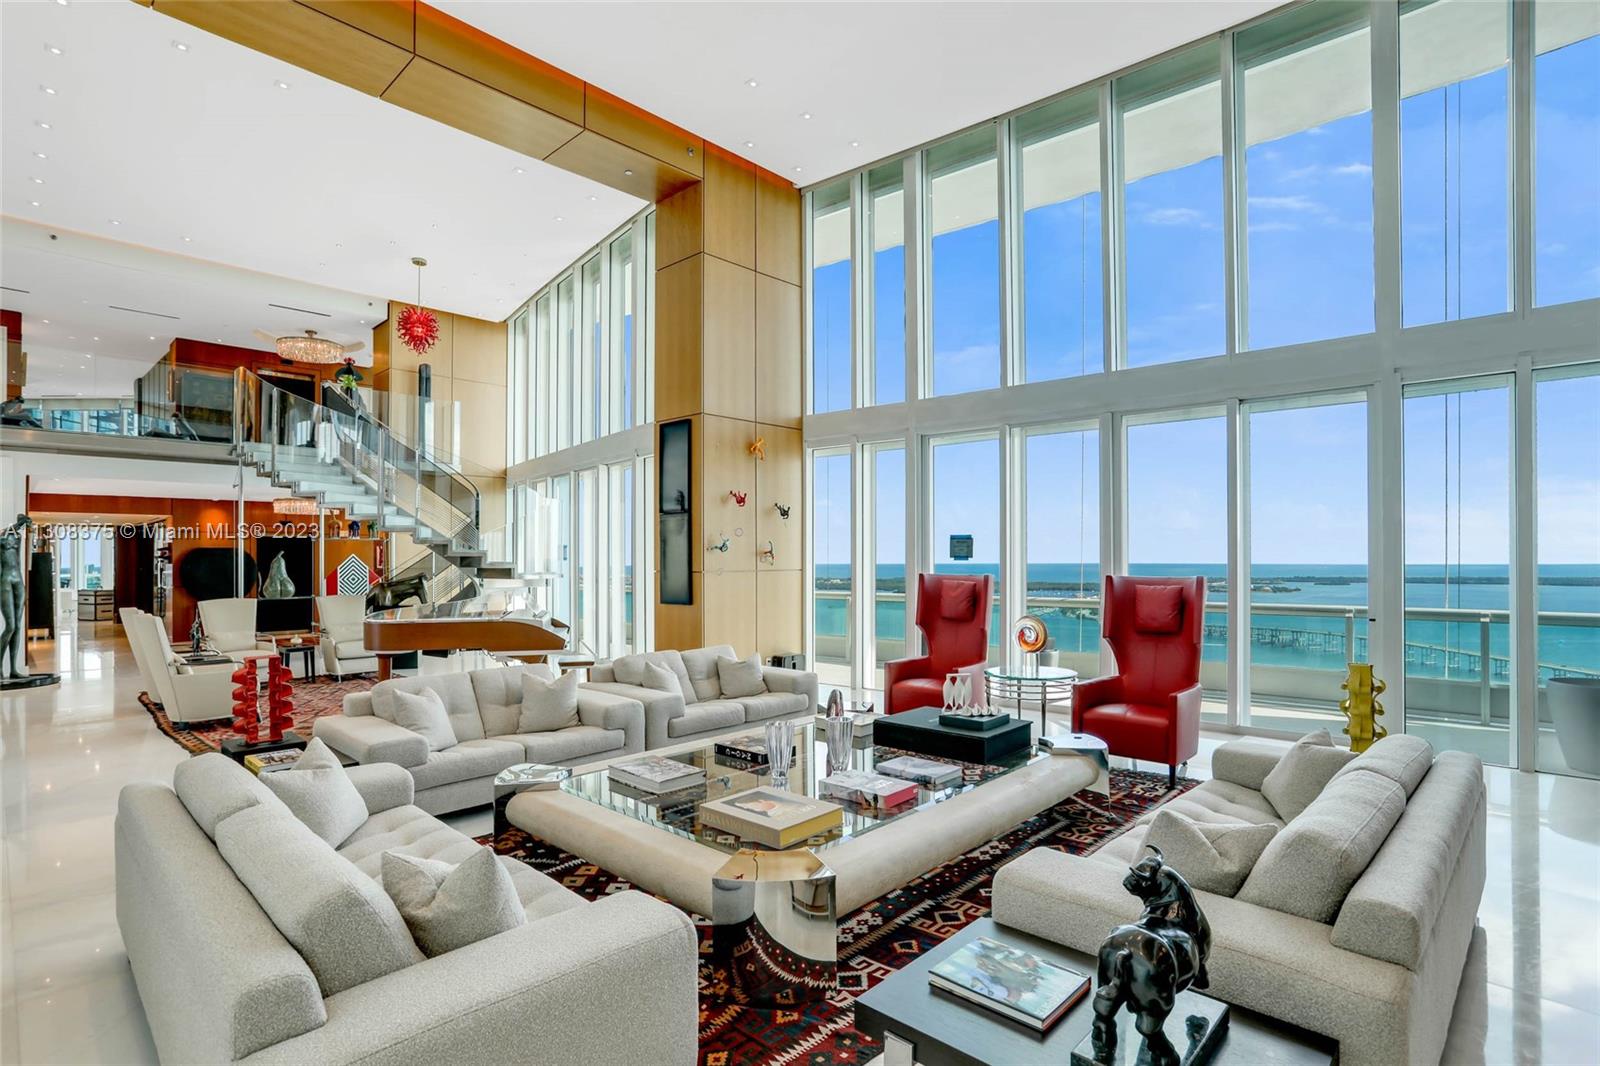 This is an absolutely gorgeous and stunning duplex  in the sky with 180 degree views of Biscayne Bay, Miami Beach, Fisher Island, Key Biscayne and beyond and city scape views from the west side.  Completely updated in the most exquisite taste and sophistication. All new marble floors. This is a home for the most cultured and elegant buyer. No expense was spared. Enjoy your own private pool (under renovation), 4 assigned parking spaces (2063,2086,2087,2088) and storage #B-060. Marina slip #13 with dimensions 27' x 97' x 5'25''This is a first class building offering privacy, full services and an outstanding way of life! To see it is to want it!